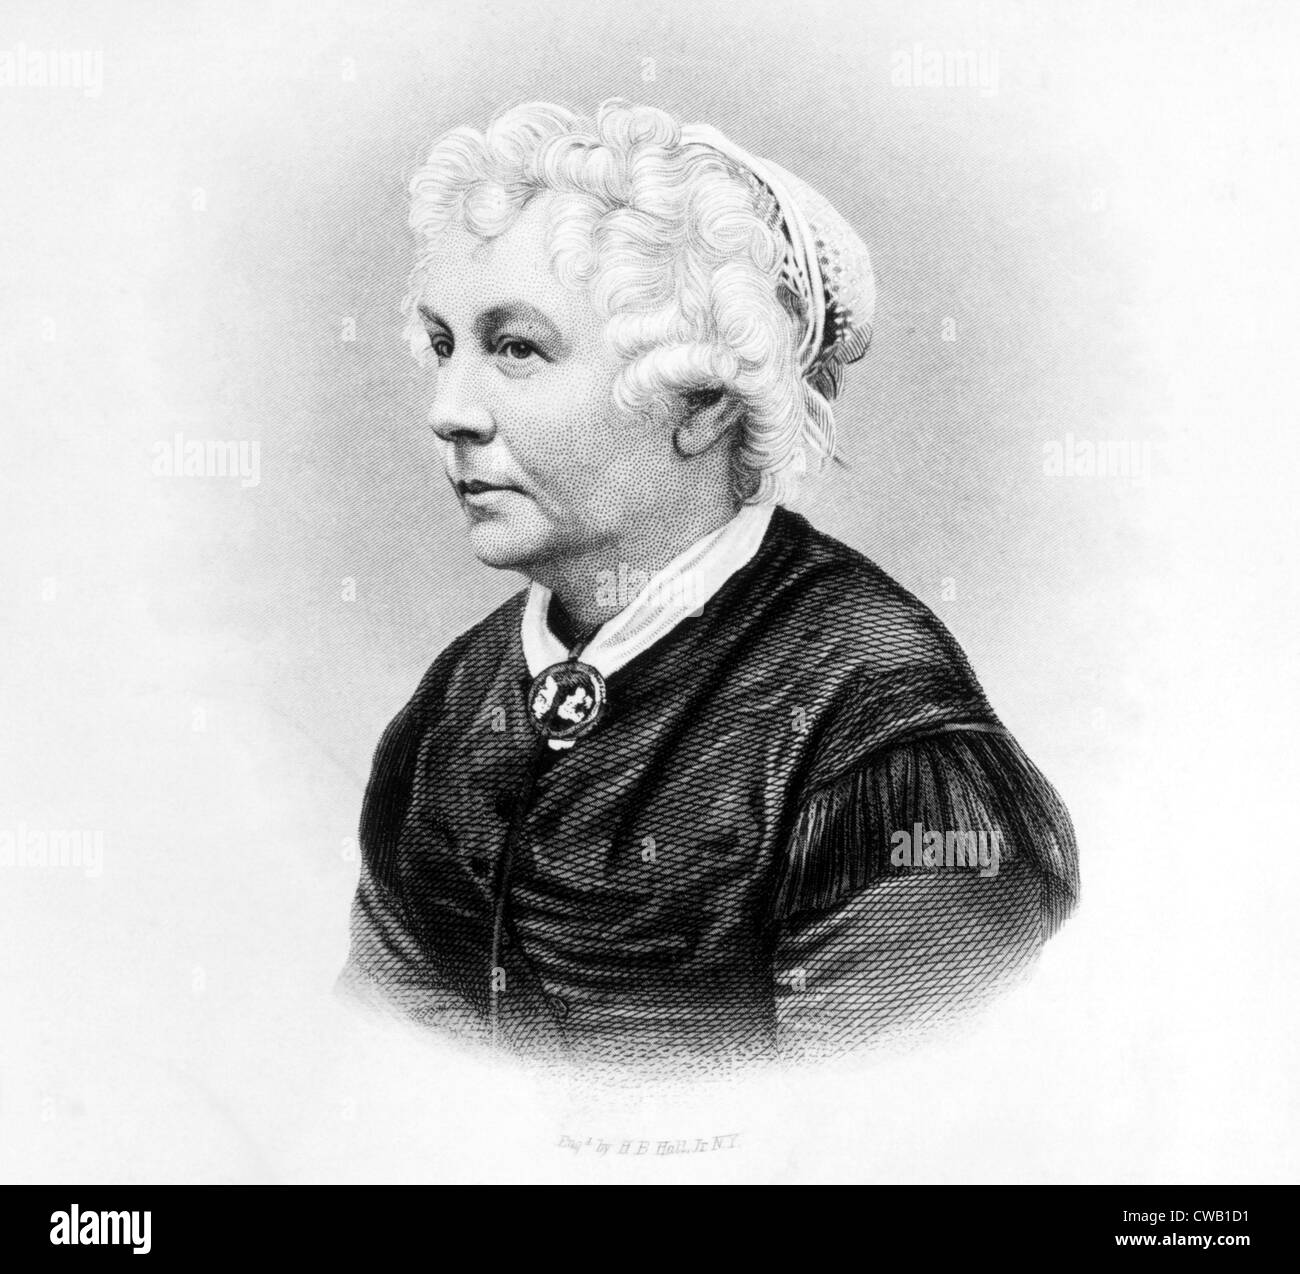 Elizabeth Cady Stanton, (1815-1902), American reformer and leader of the women's suffrage movement, c. 1868 Stock Photo